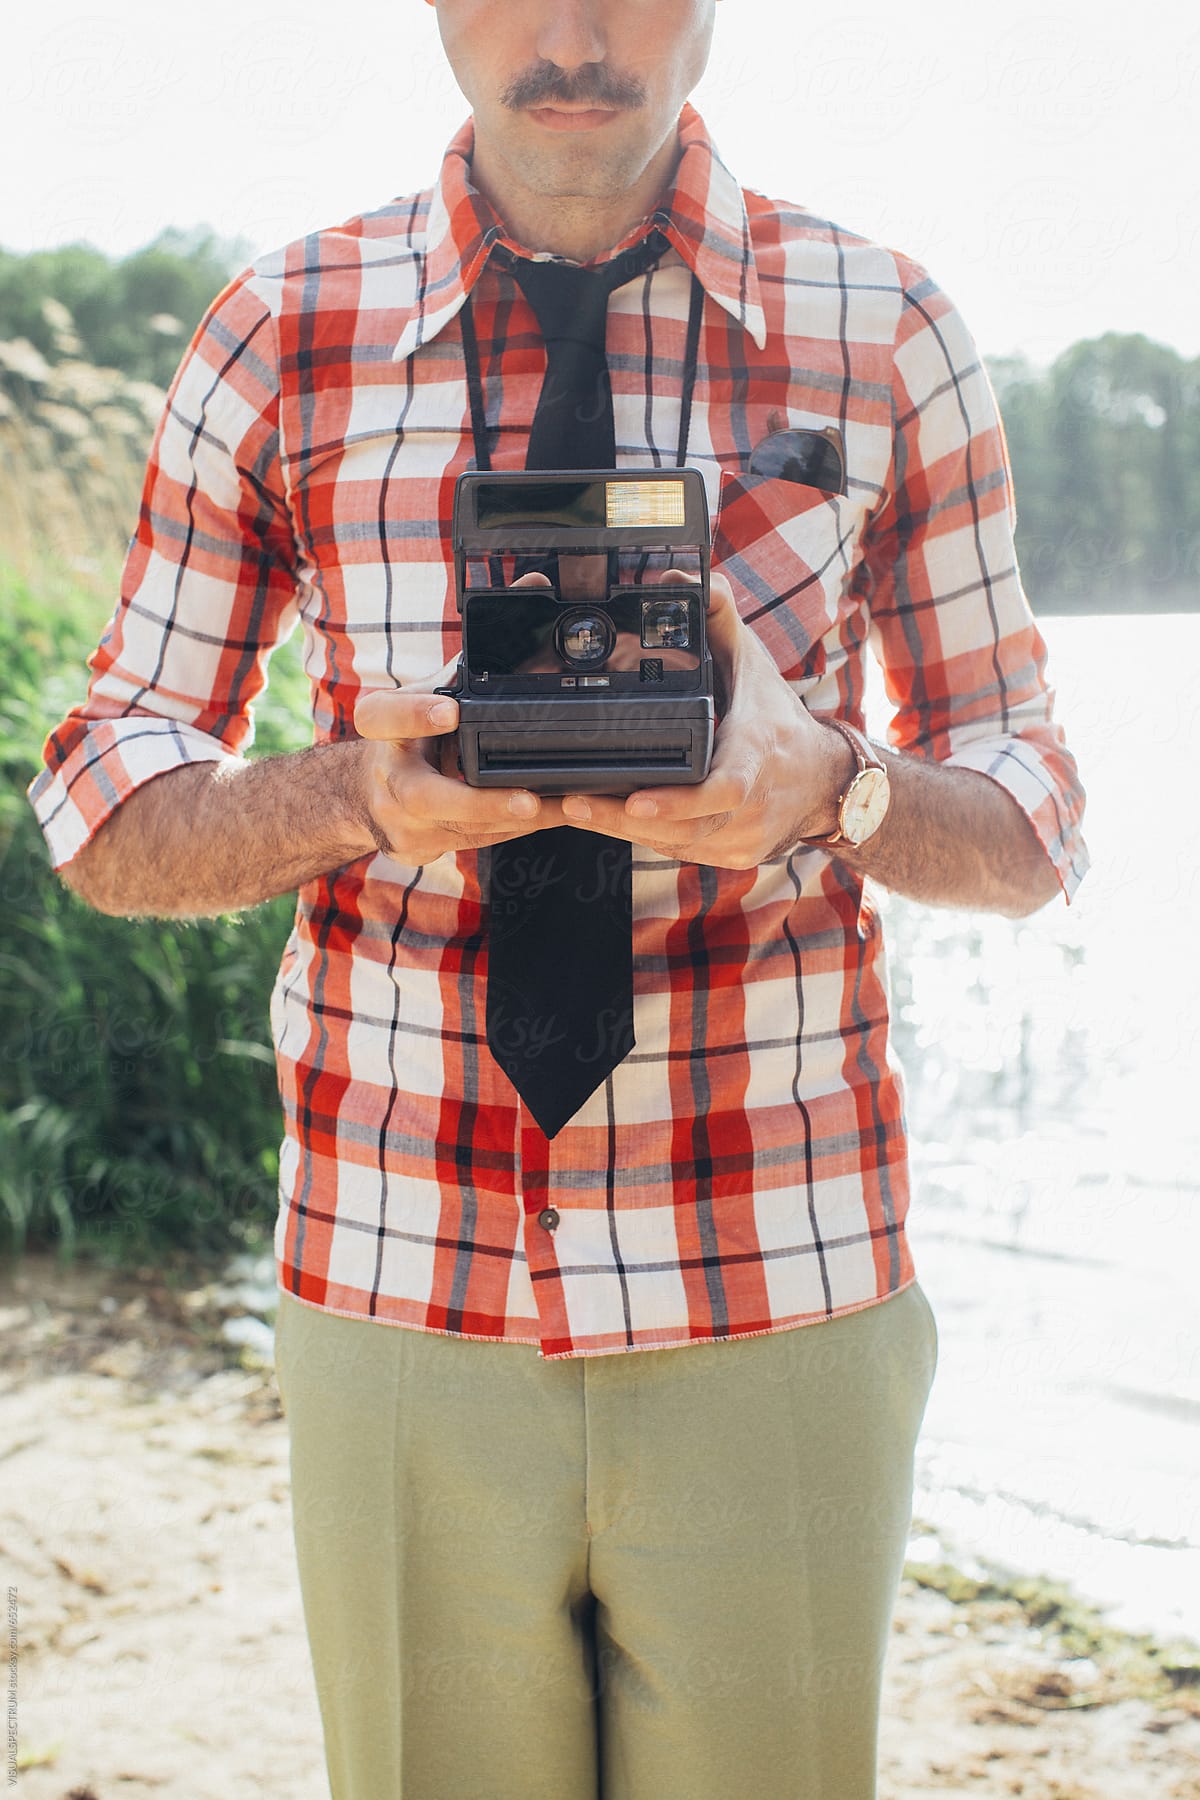 Retro-Styled Male Hipster With Moustache Holding Polaroid Camera in Front of Chest